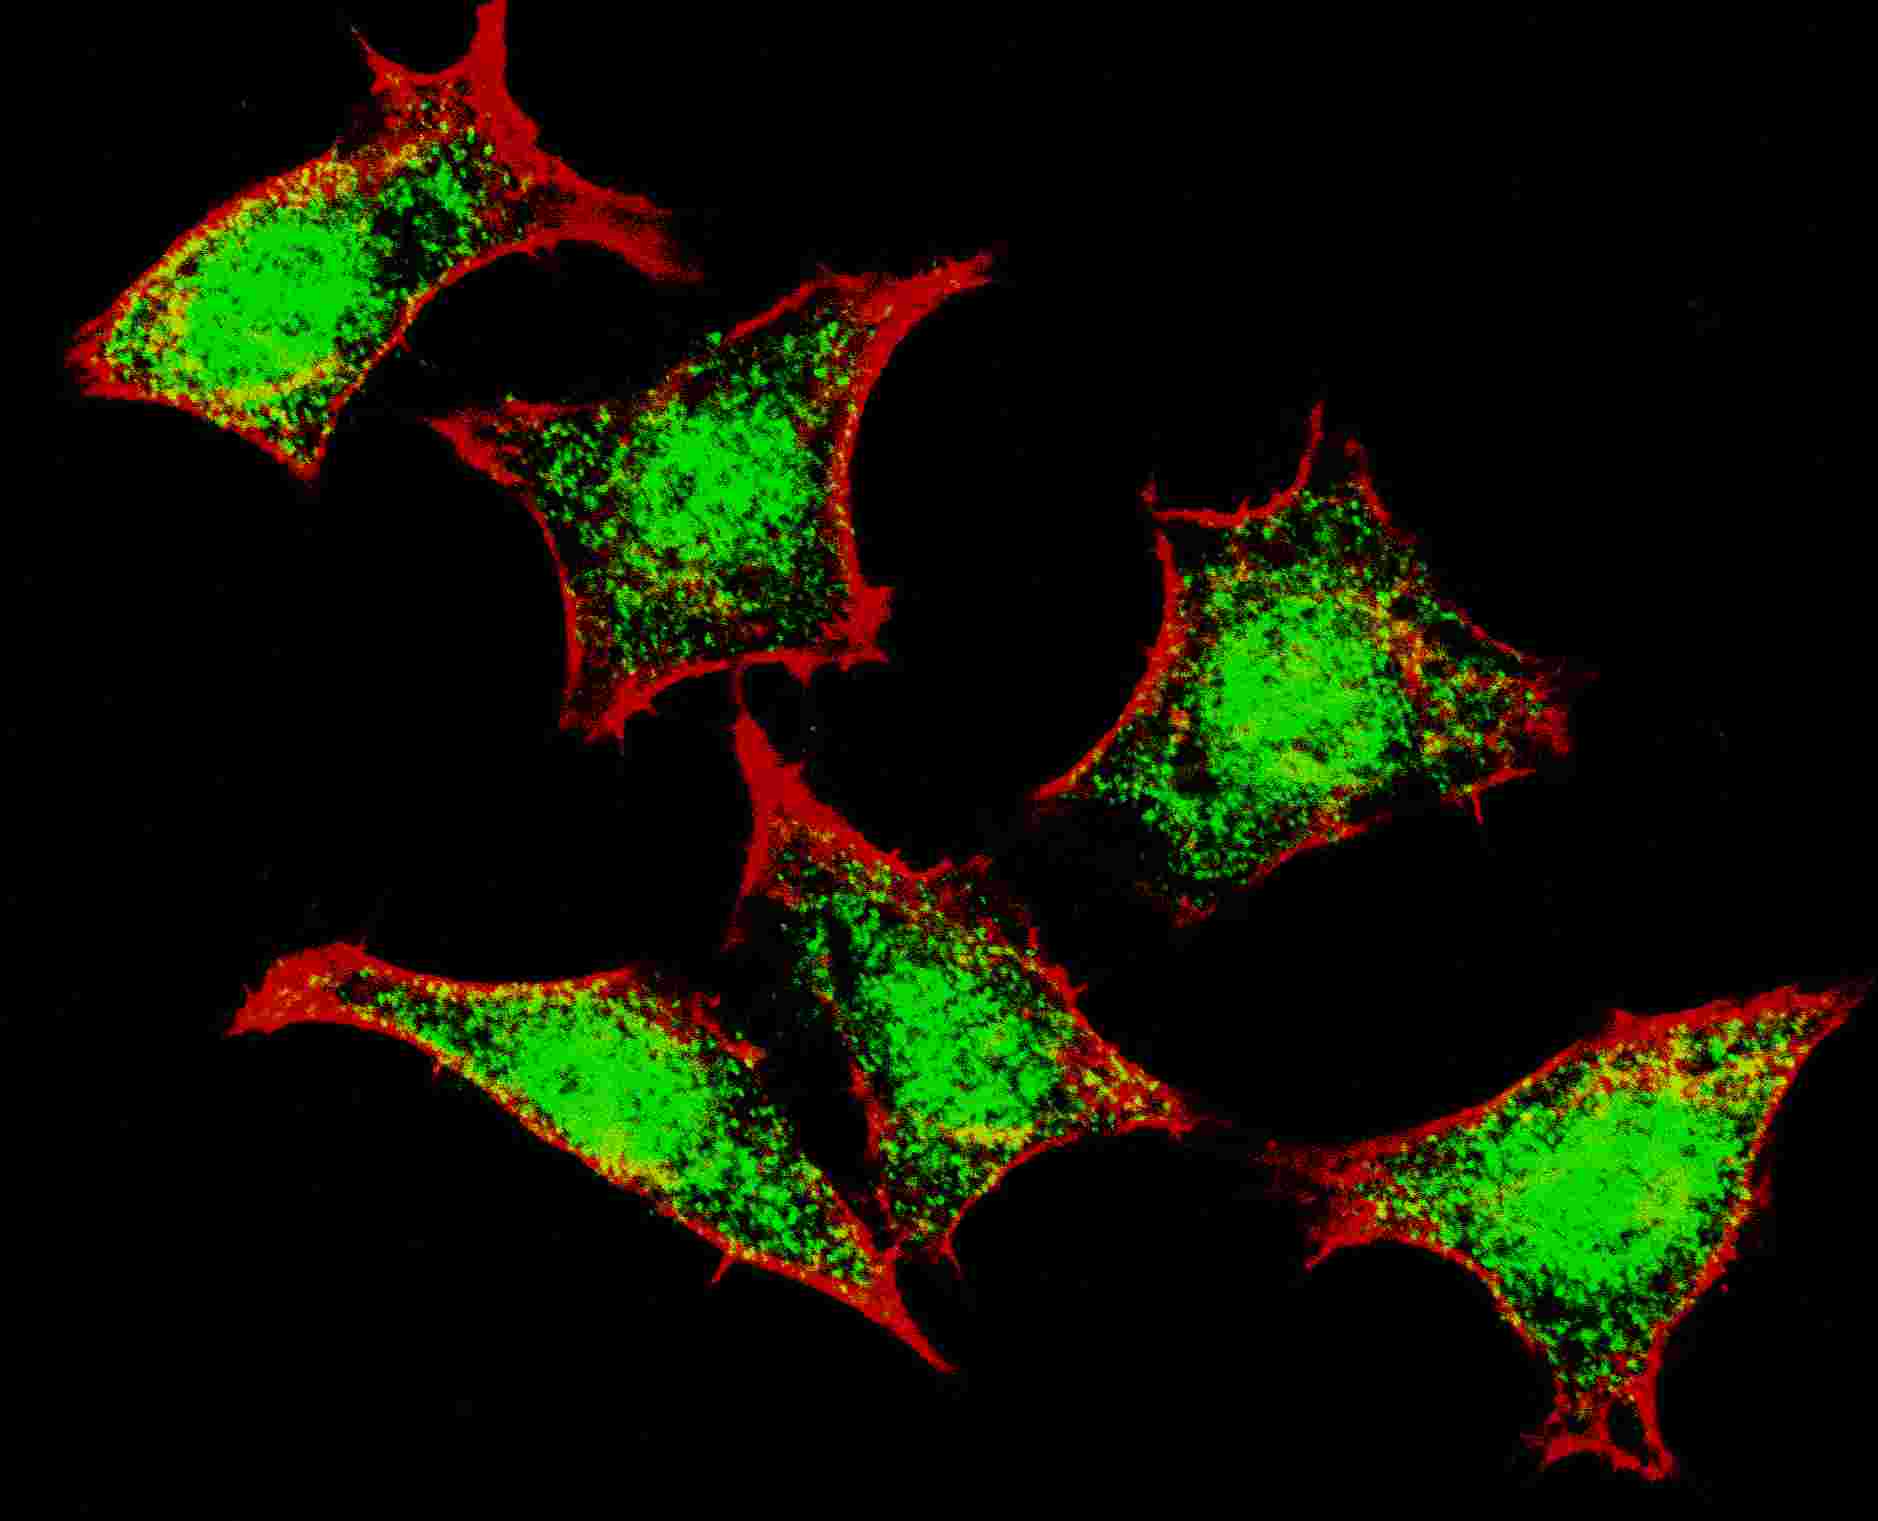 Fluorescent confocal image of HeLa cells stained with Natriuretic Peptide Receptor C (N-term) antibody. HeLa cells were fixed with 4% PFA (20 min), permeabilized with Triton X-100 (0.2%, 30 min). Cells were then incubated with AP8113a Natriuretic Peptide Receptor C (N-term) primary antibody (1:200, 2 h at room temperature). For secondary antibody, Alexa Fluor� 488 conjugated donkey anti-rabbit antibody (green) was used (1:1000, 1h). Nuclei were counterstained with Hoechst 33342 (blue) (10 ?g/ml, 5 min). Note the highly specific localization of the Natriuretic Peptide Receptor C mainly to the mainly to the nucleus.